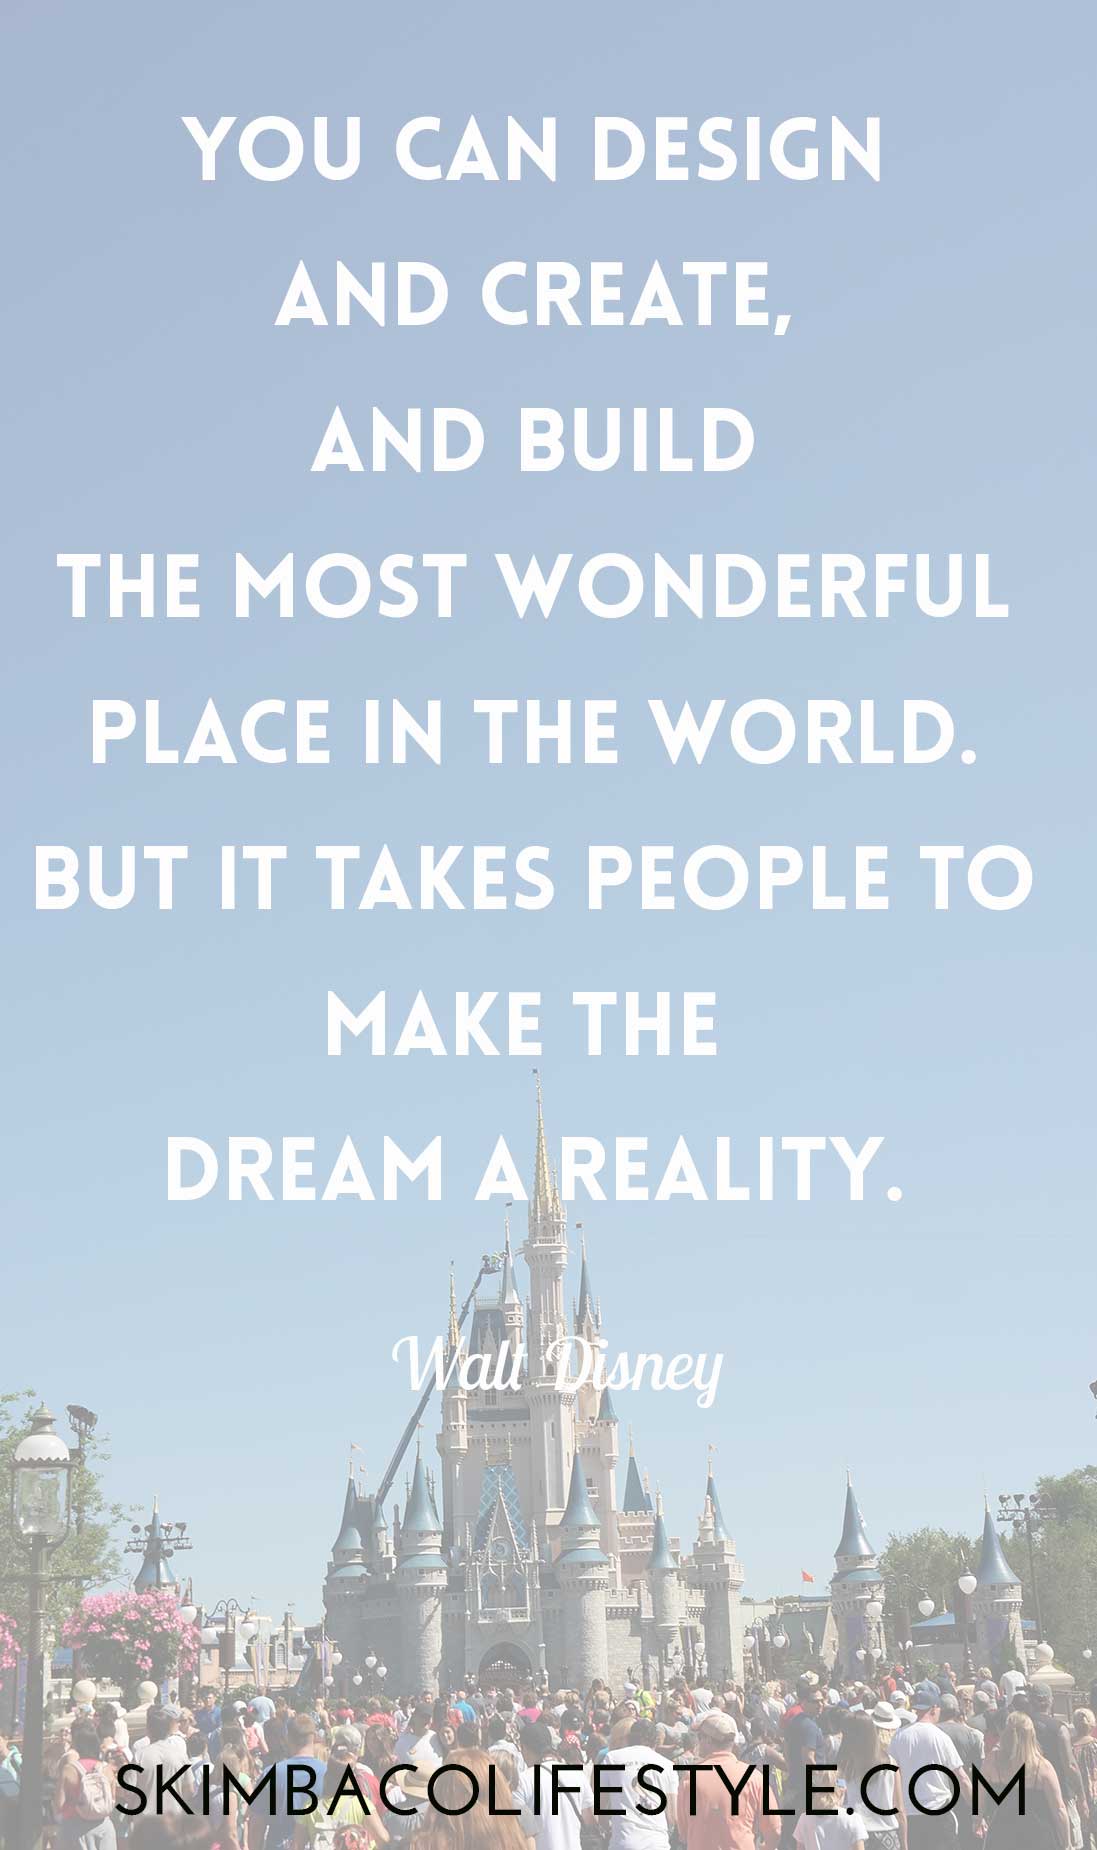 You can design and create, and build the most wonderful place in the world. But it takes people to make the dream a reality. Walt Disney quote via @skimbaco